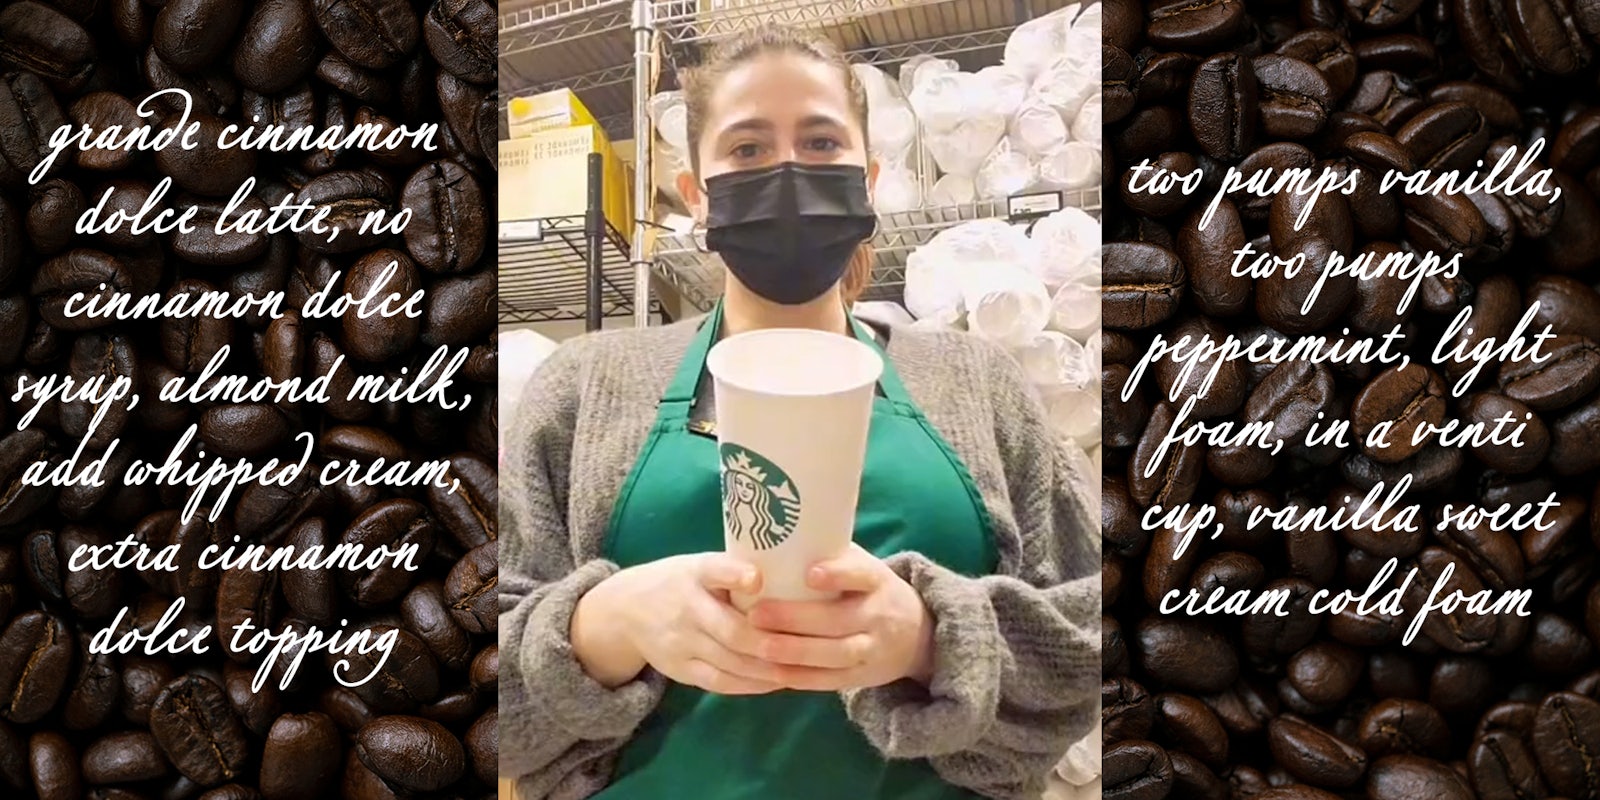 starbucks worker holding cup with 'grande cinnamon dolce latte, no cinnamon dolce syrup, almond milk, add whipped cream, extra cinnamon dolce topping, two pumps vanilla, two pumps peppermint, light foam, in a venti cup, vanilla sweet cream cold foam' over coffee bean background